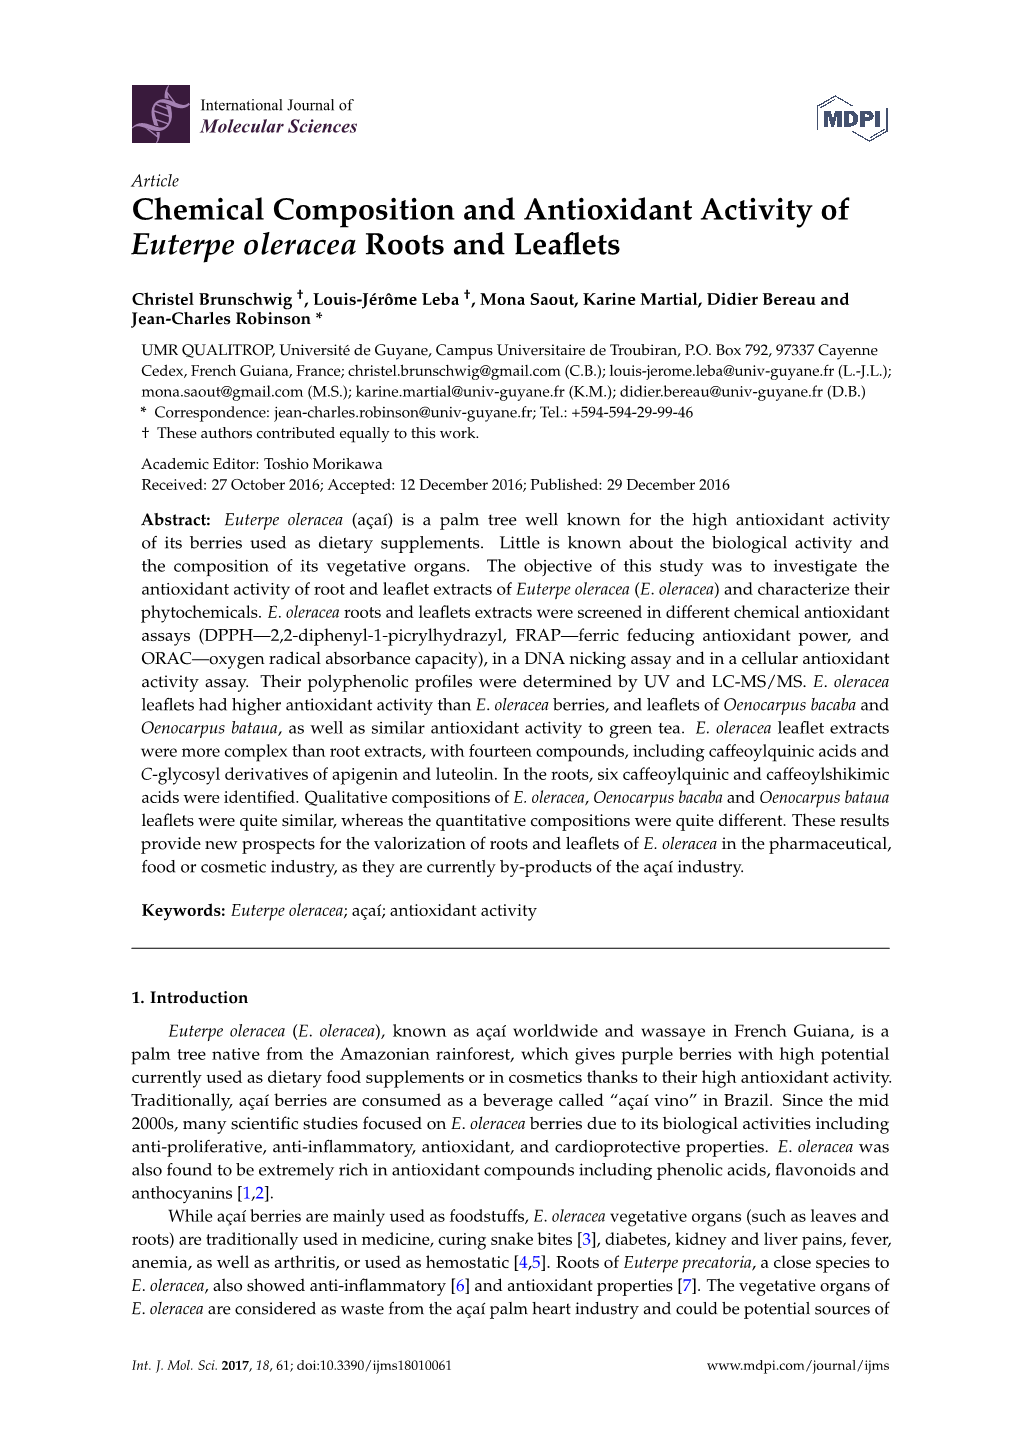 Chemical Composition and Antioxidant Activity of Euterpe Oleracea Roots and Leaﬂets